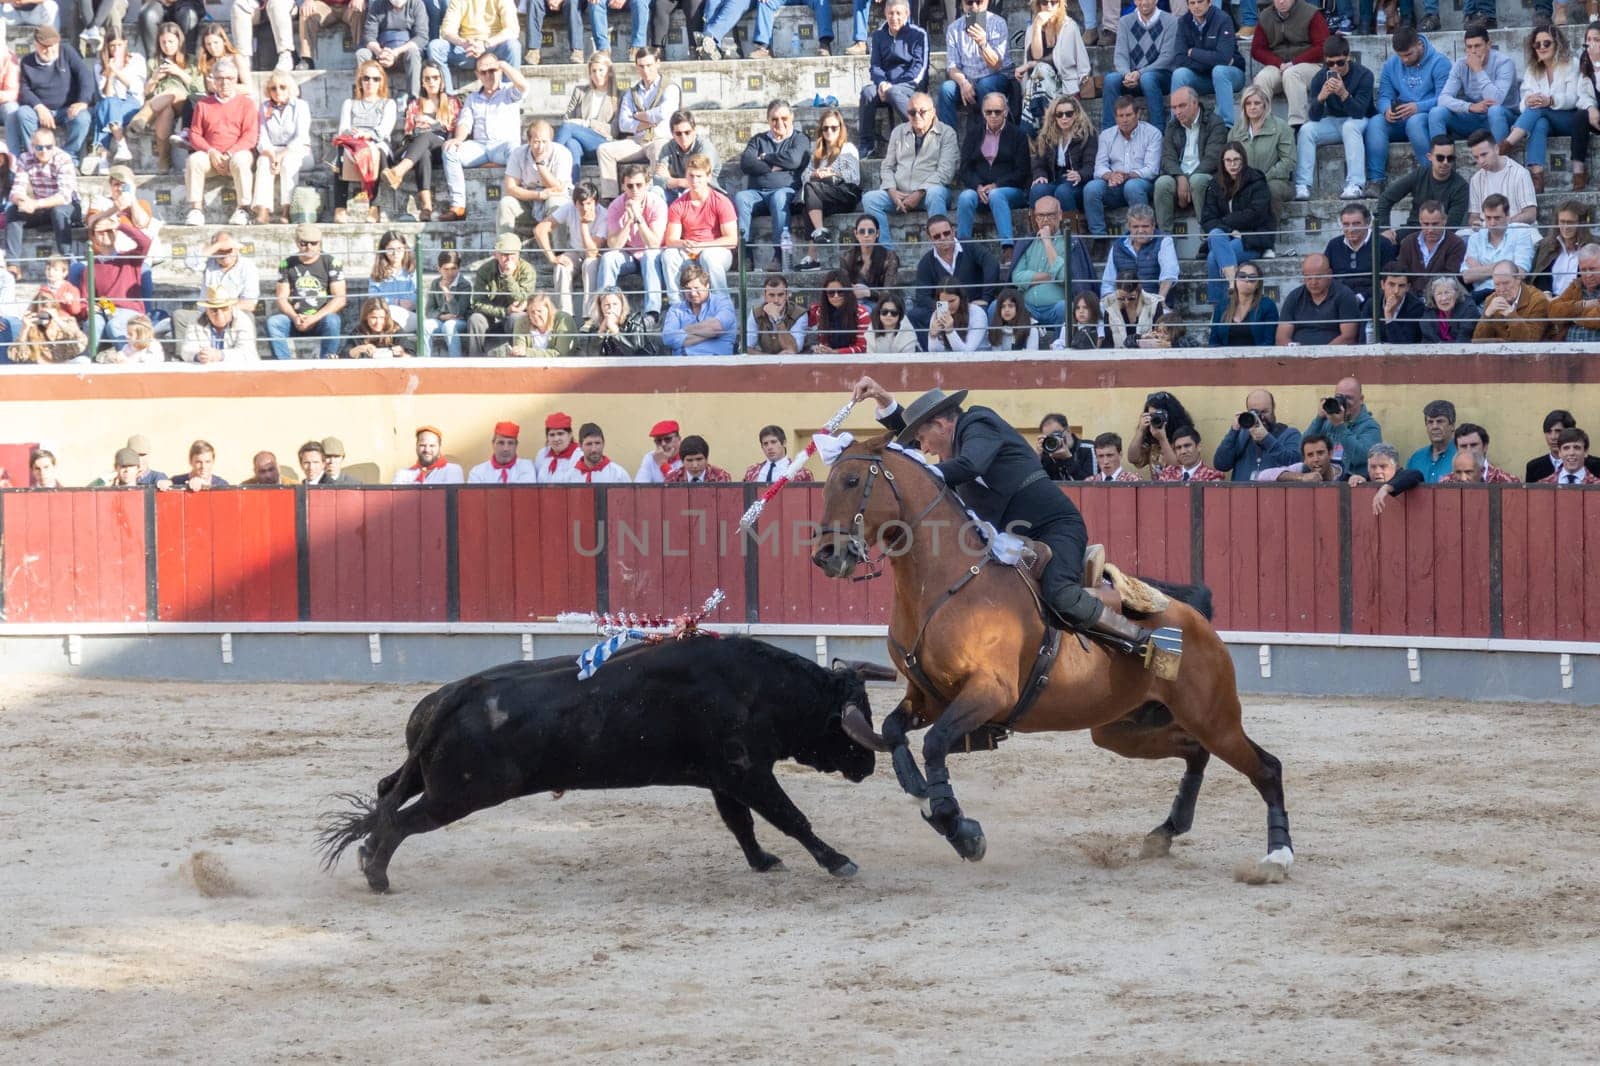 March 26, 2023 Lisbon, Portugal: Tourada - cavaleiro on horseback against the bull on the arena in amphitheater by Studia72